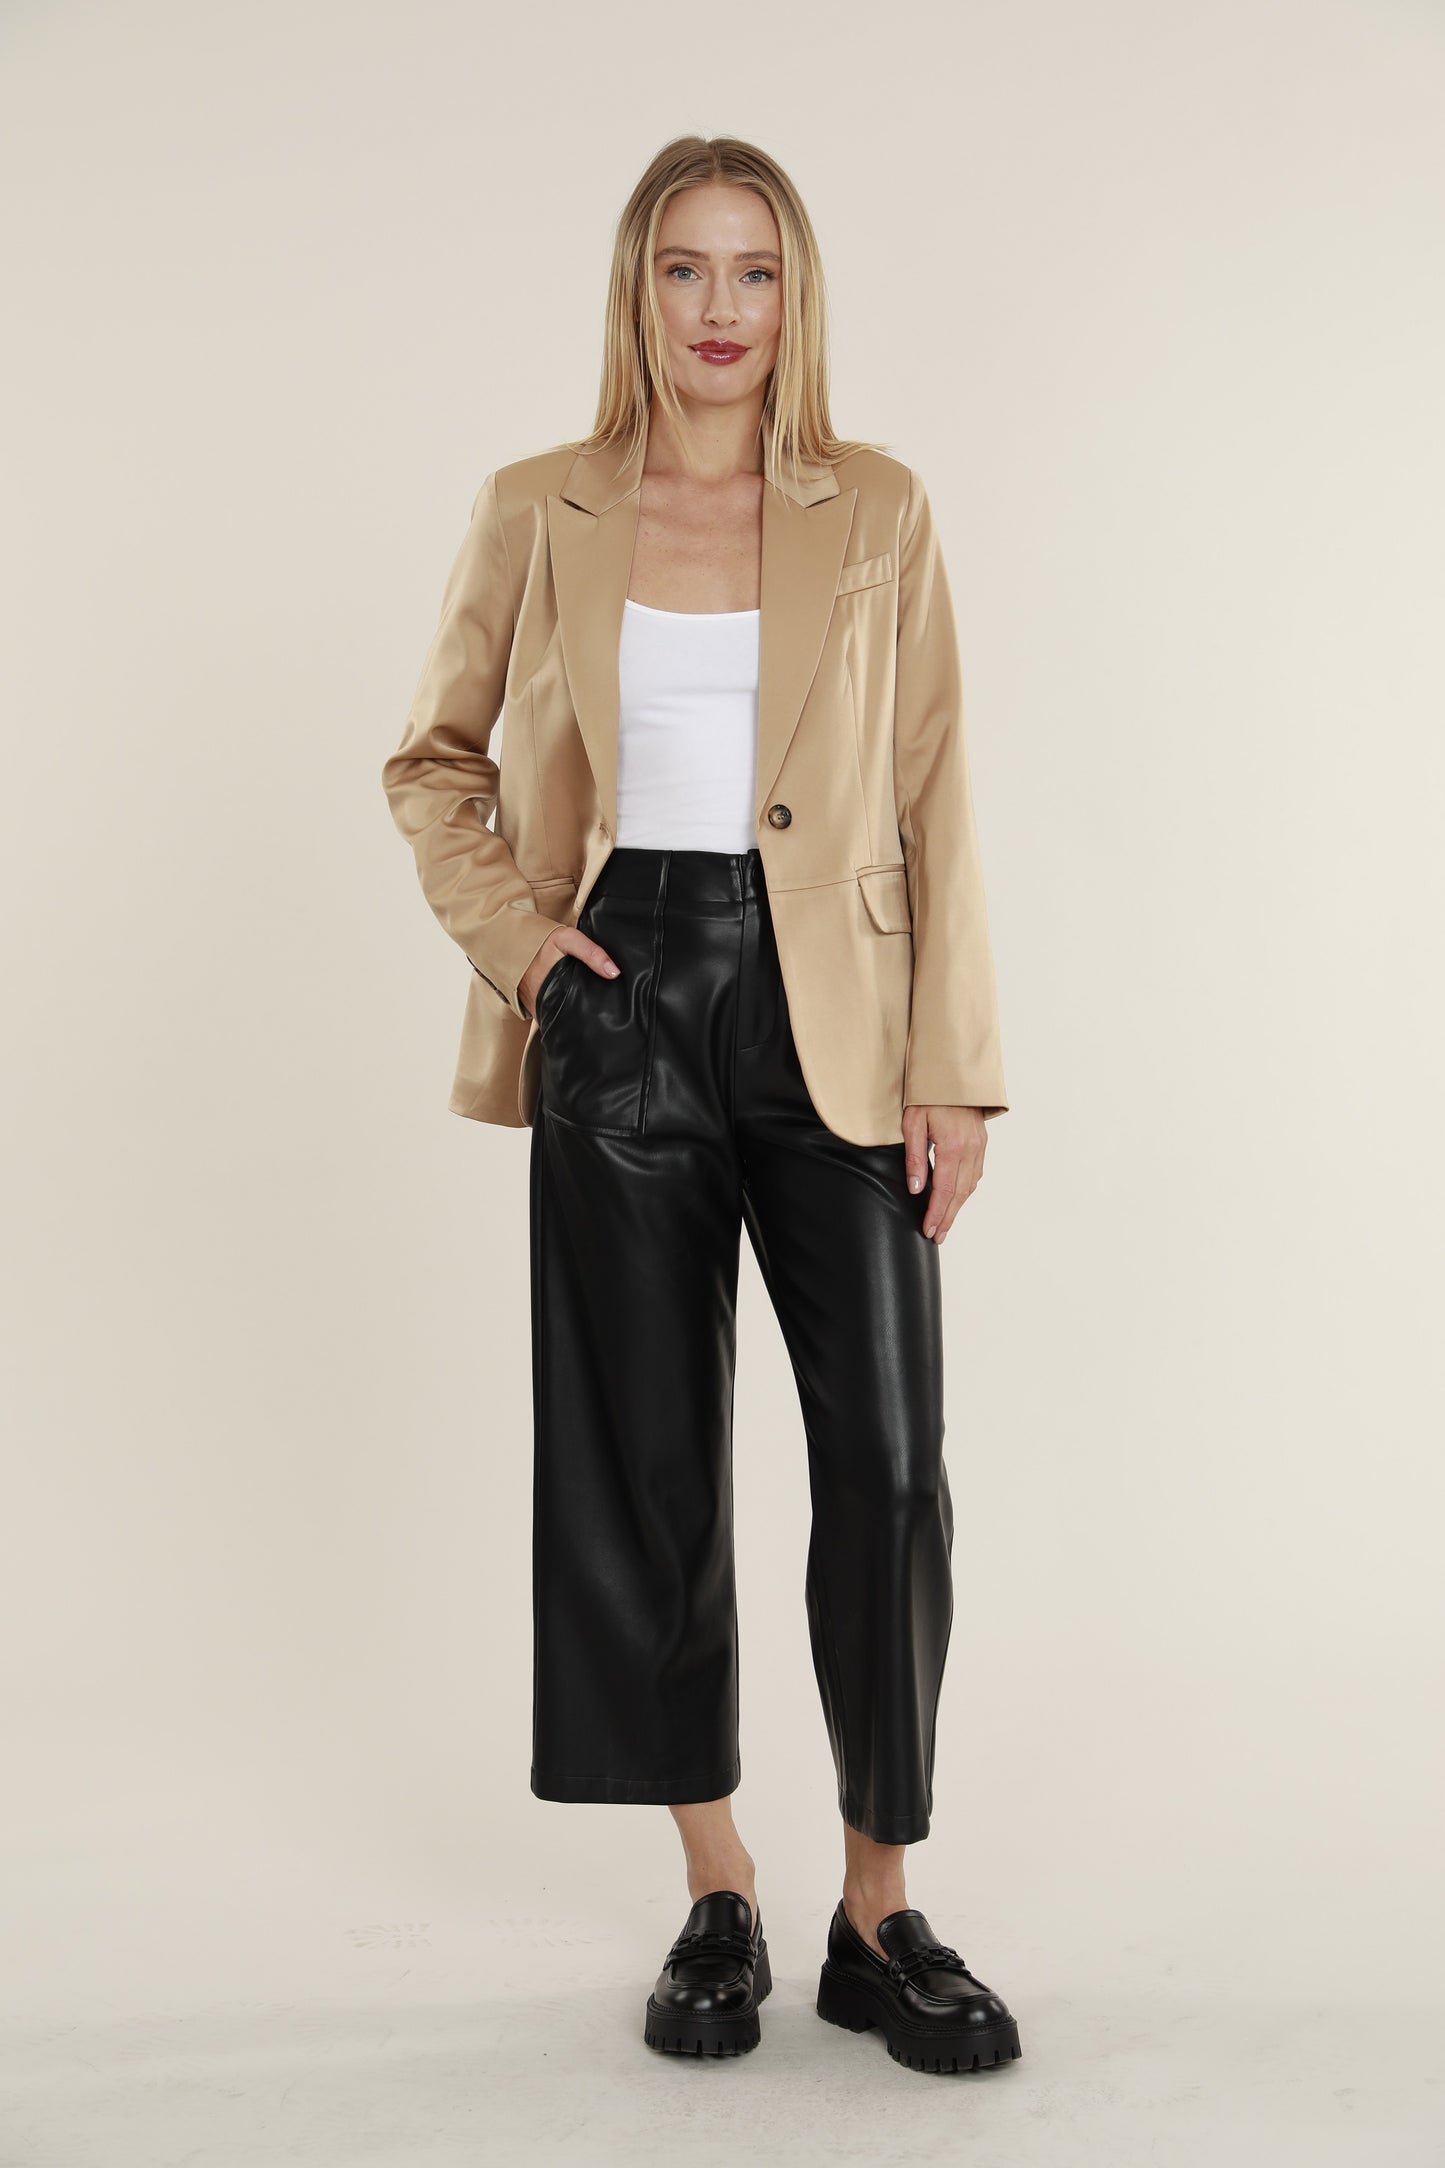 Cropped Faux Leather Trousers